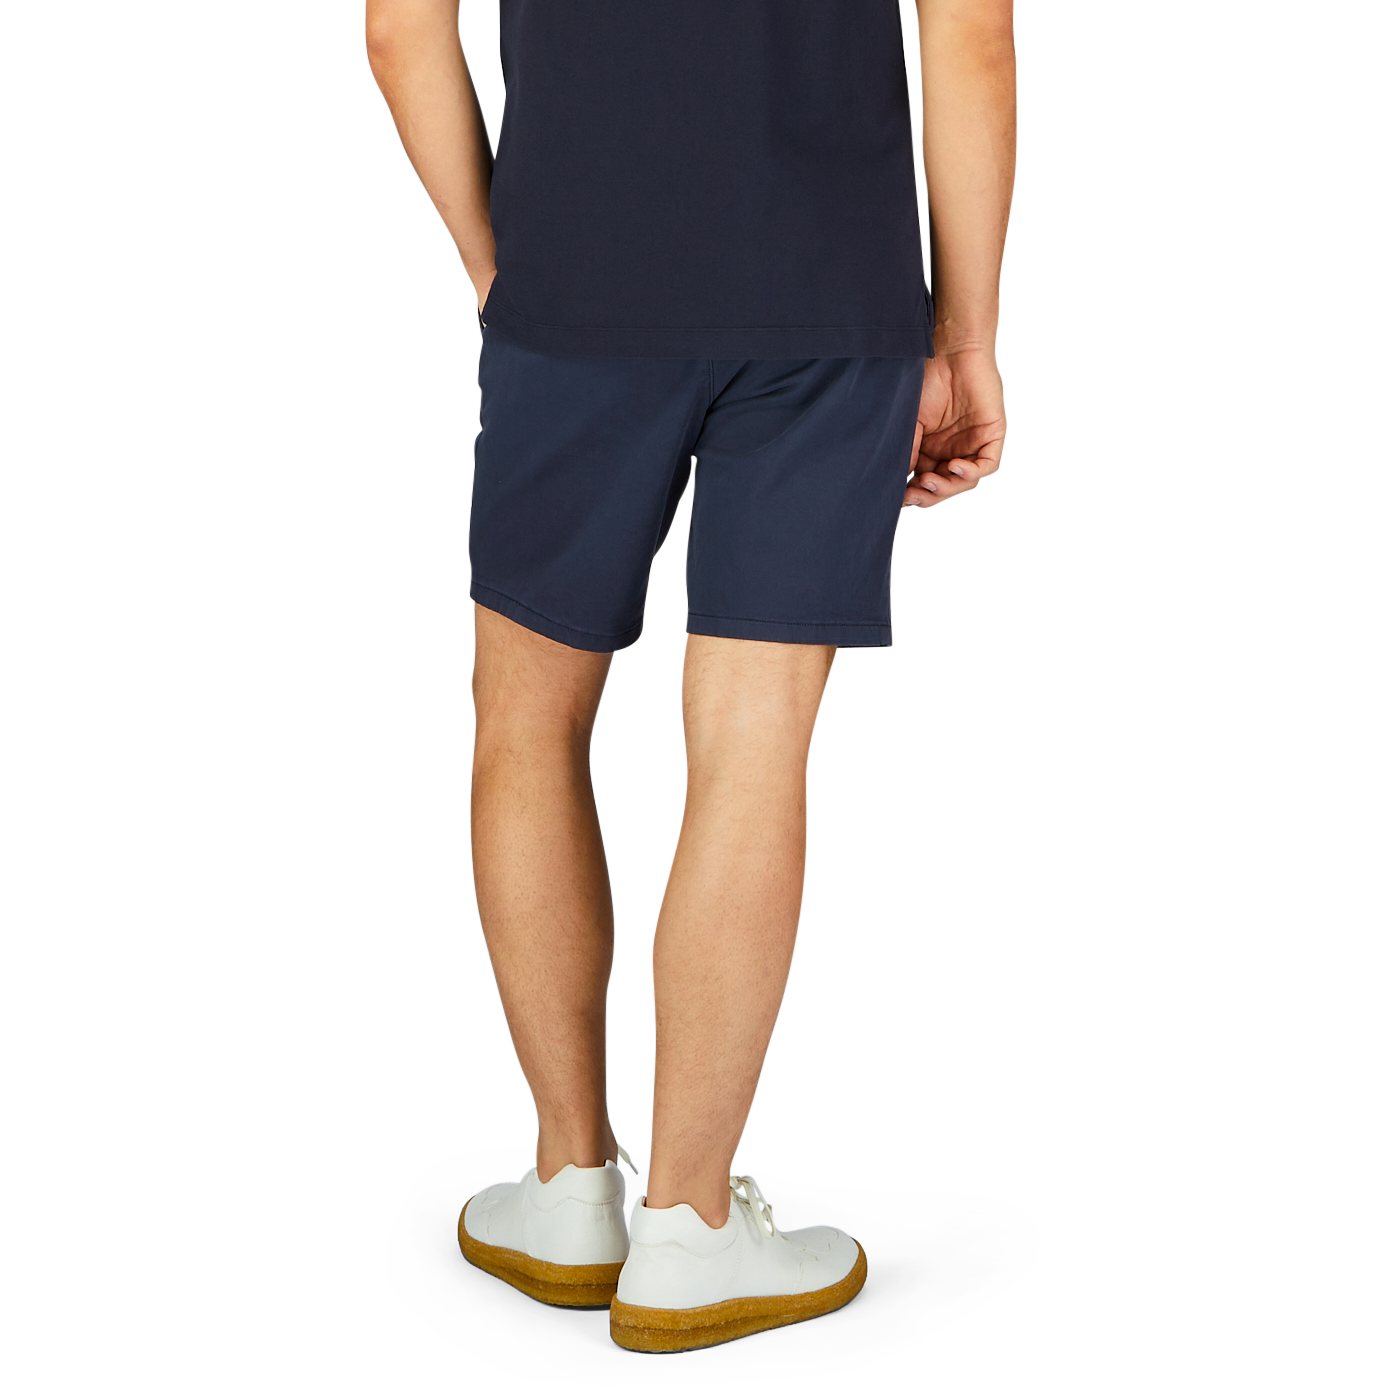 Man standing wearing Paige navy blue cotton blend Phillips shorts and white sneakers with yellow soles.